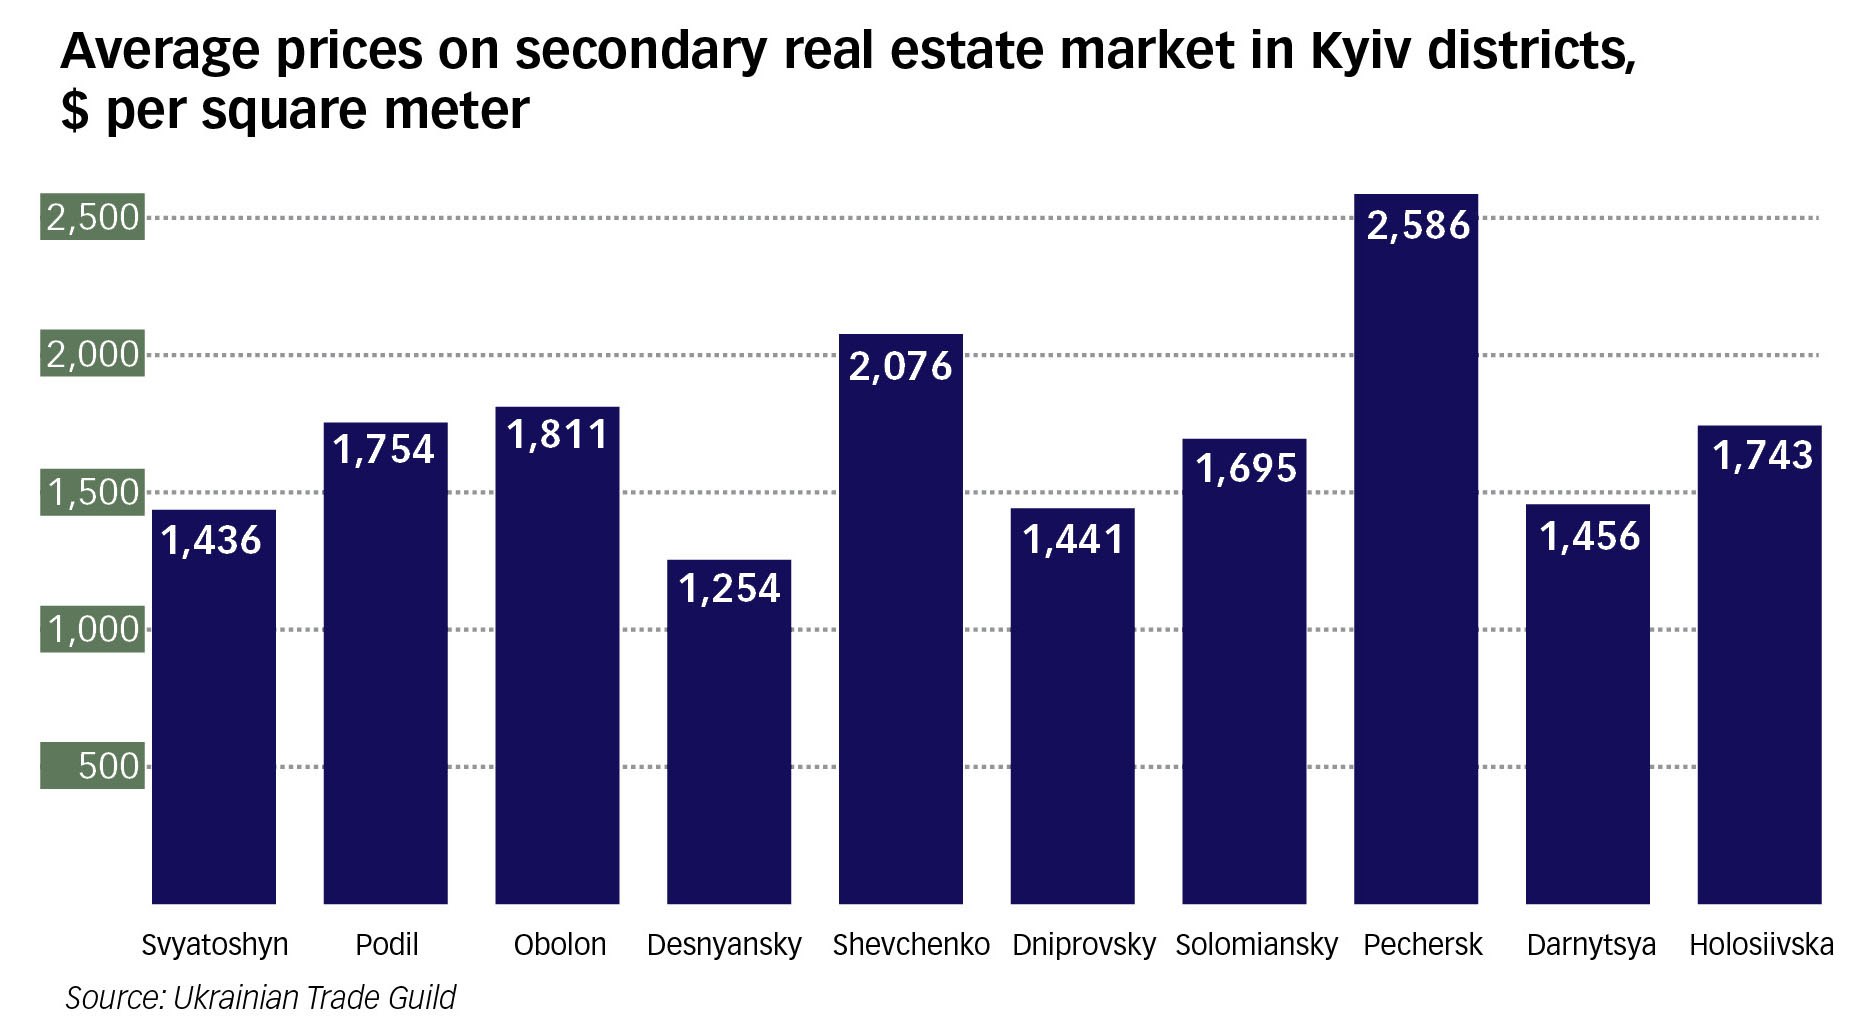 Average prices on secondary real estate market in Kyiv districts, $ per square meter